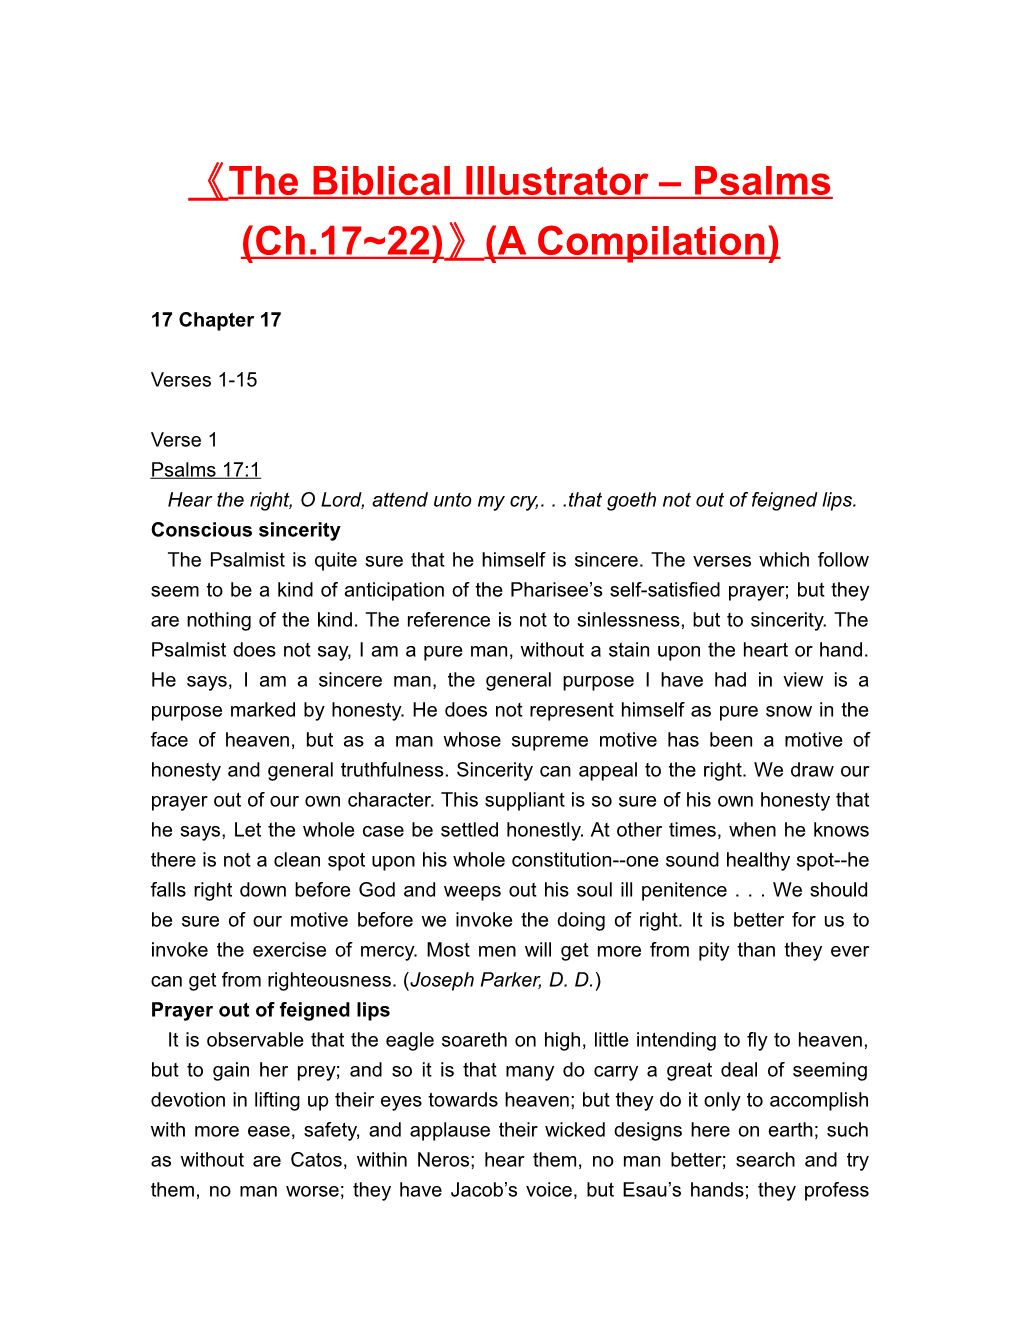 The Biblical Illustrator Psalms (Ch.17 22) (A Compilation)